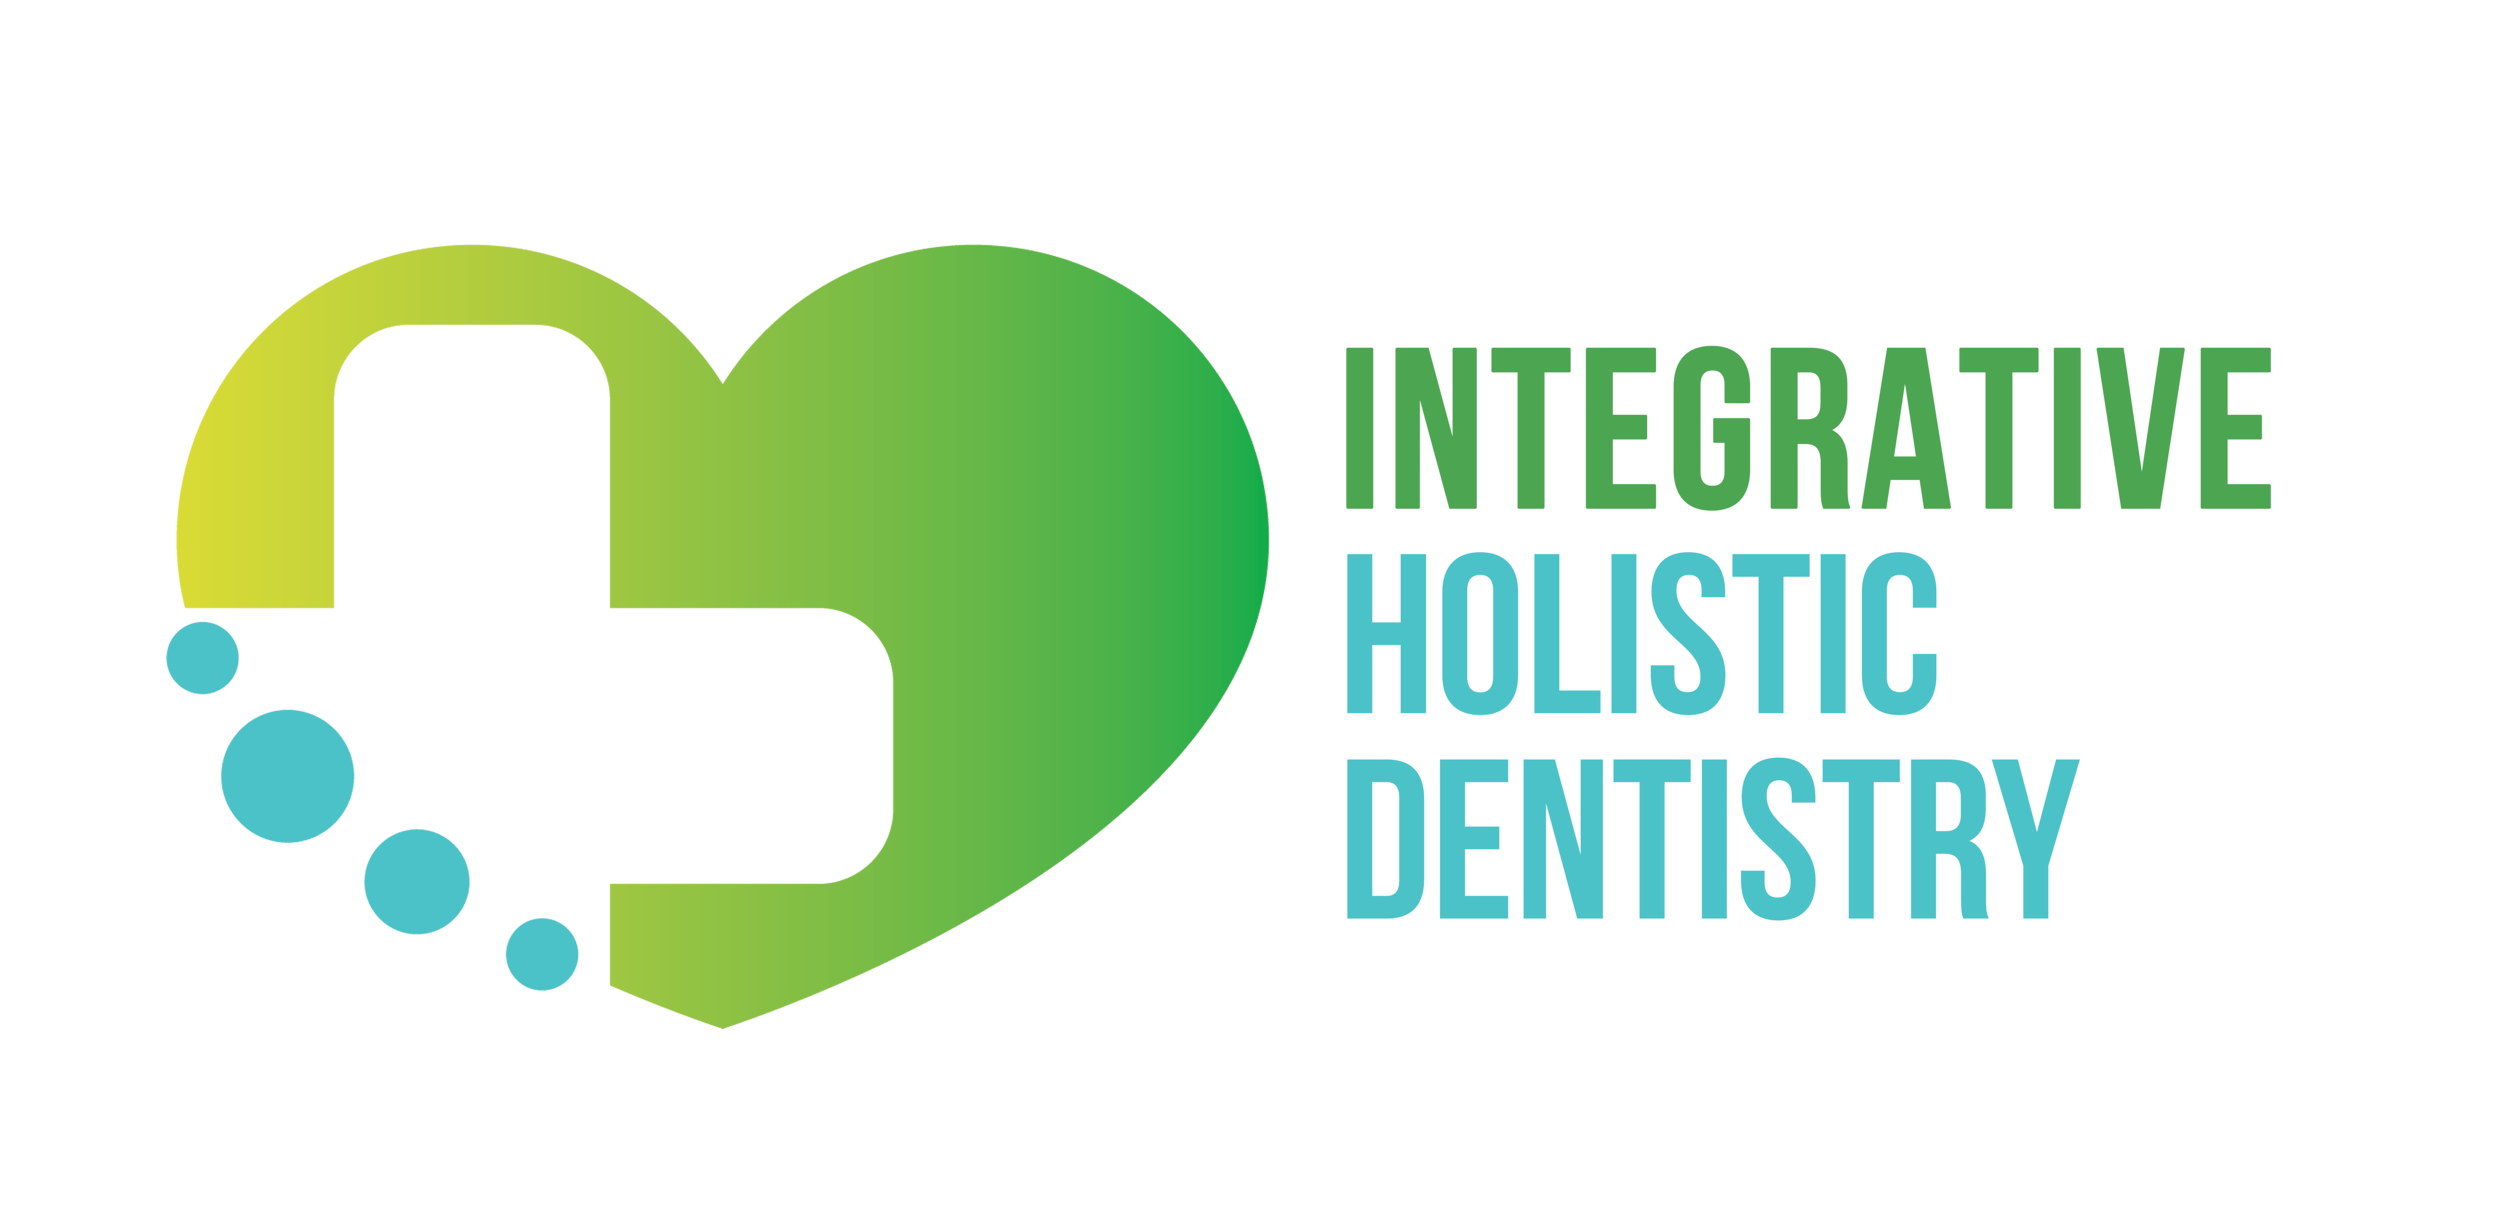 Integrative Approaches in Dentistry: A Holistic Perspective